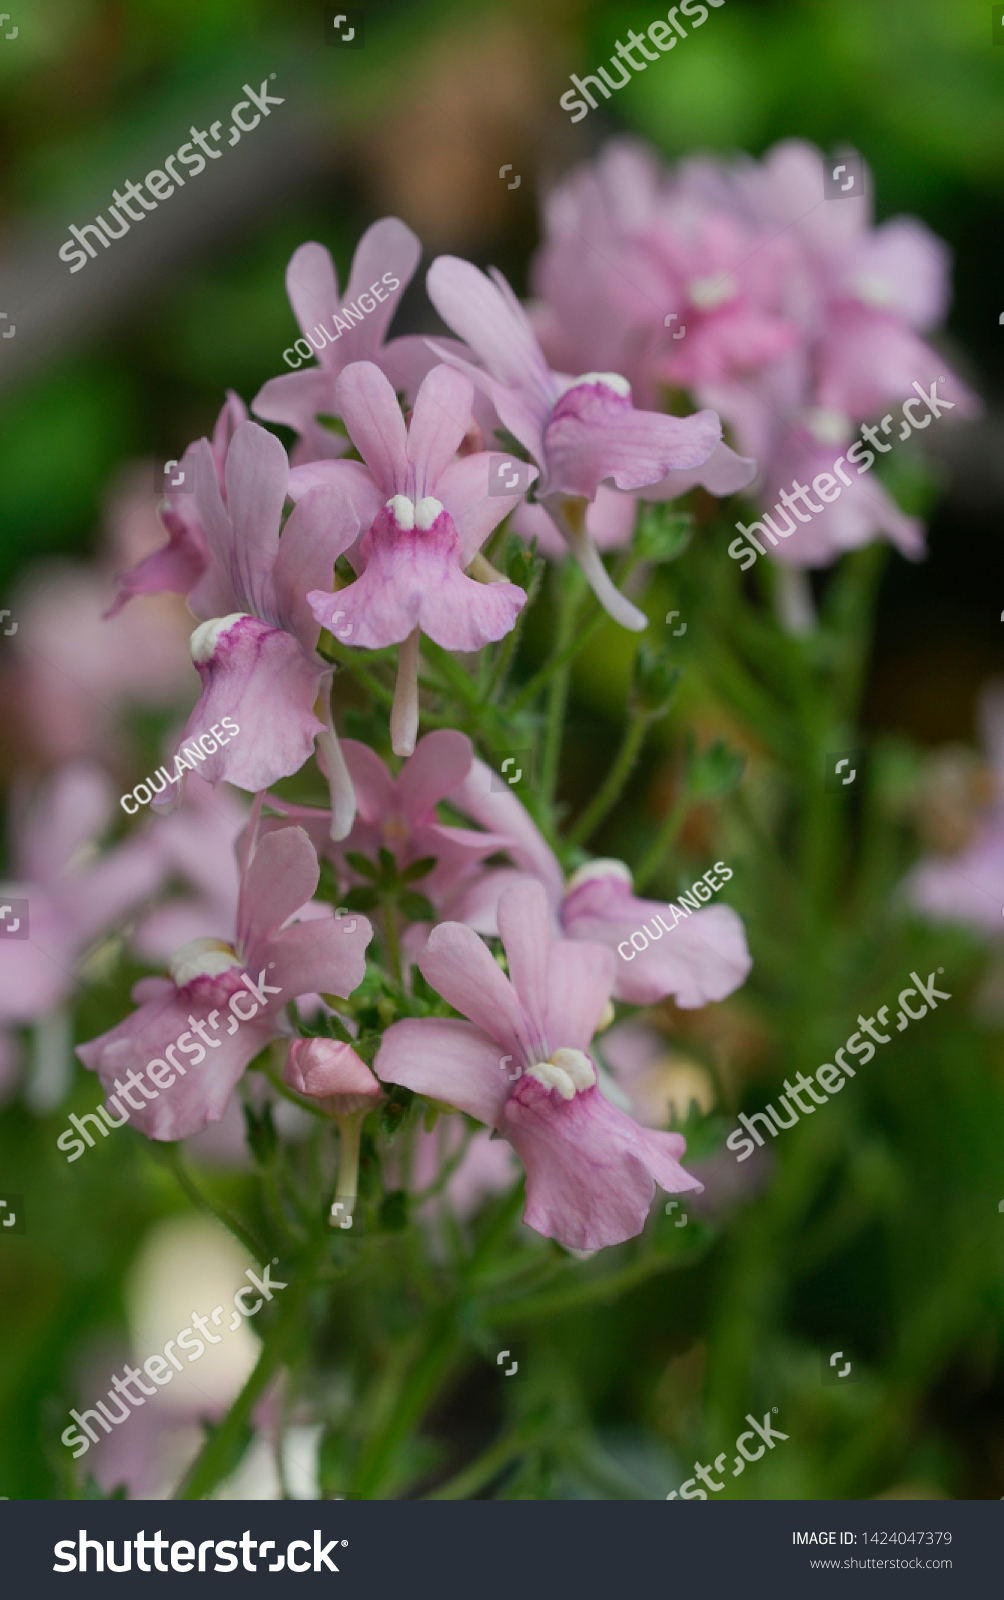 Flowers Cape Snapdragon Cultivar South Africa Stock Photo Edit Now 1424047379